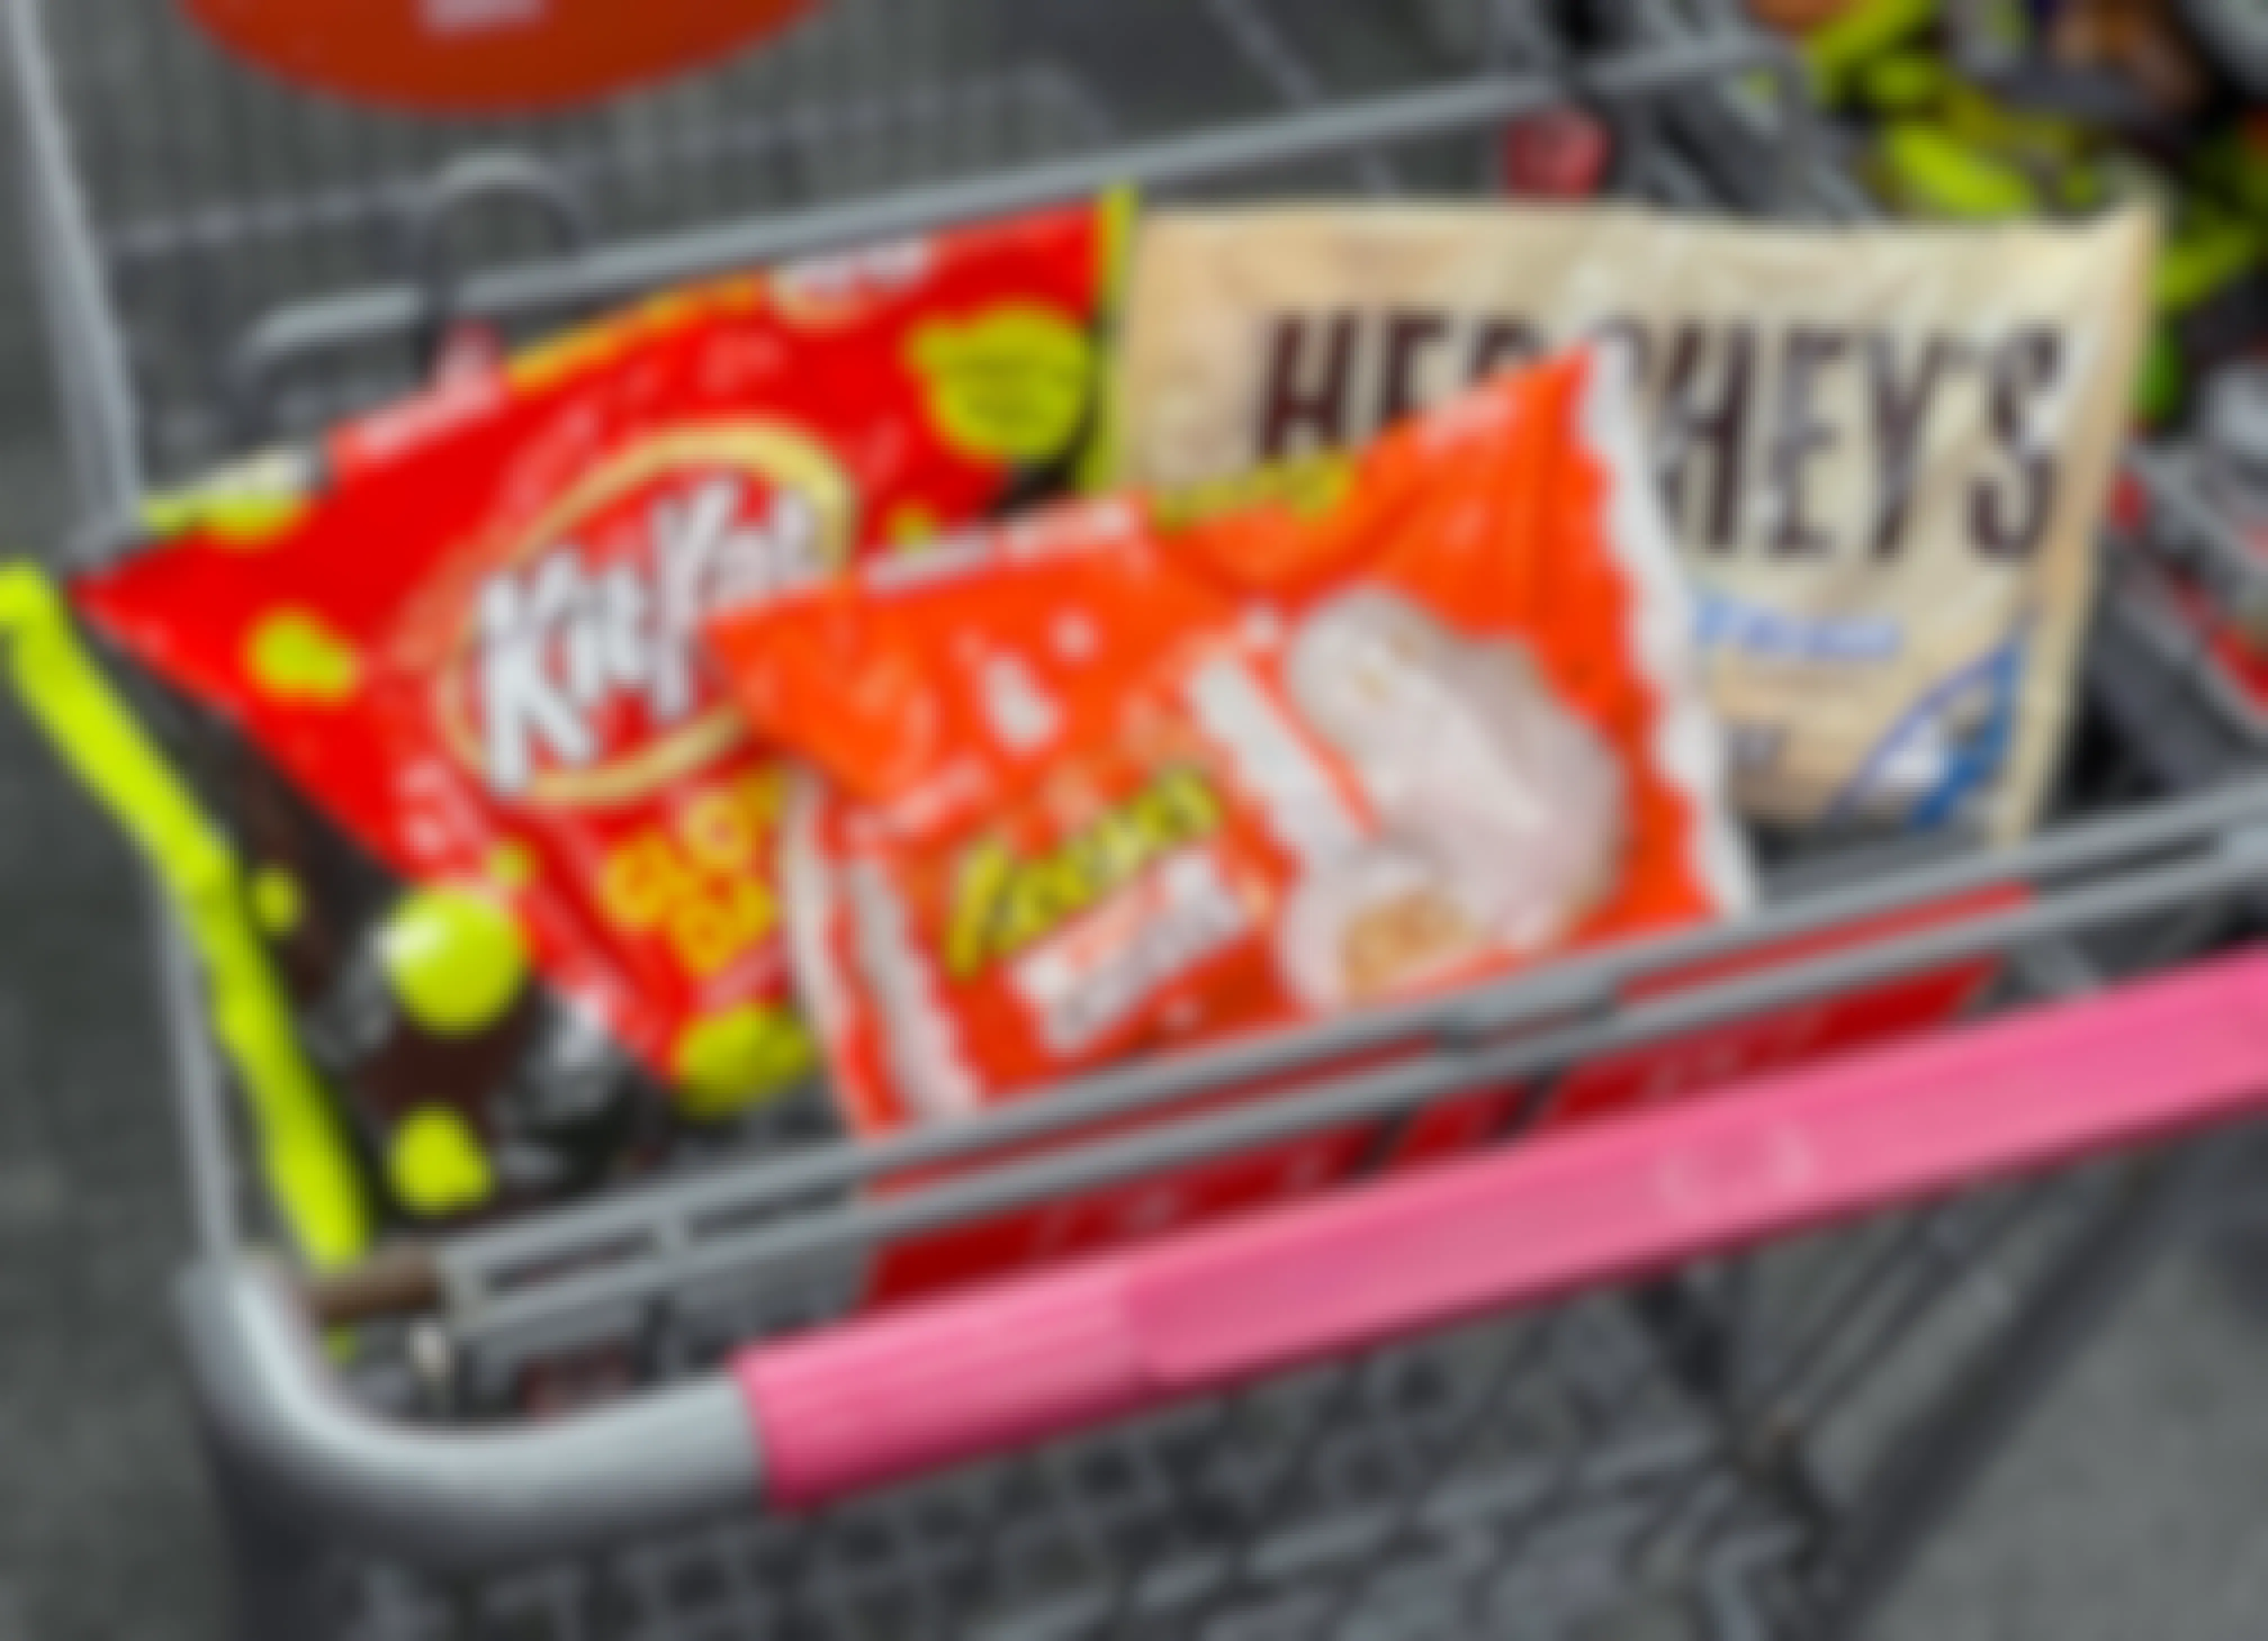 Top 7 Tips to Save Money on Halloween Candy